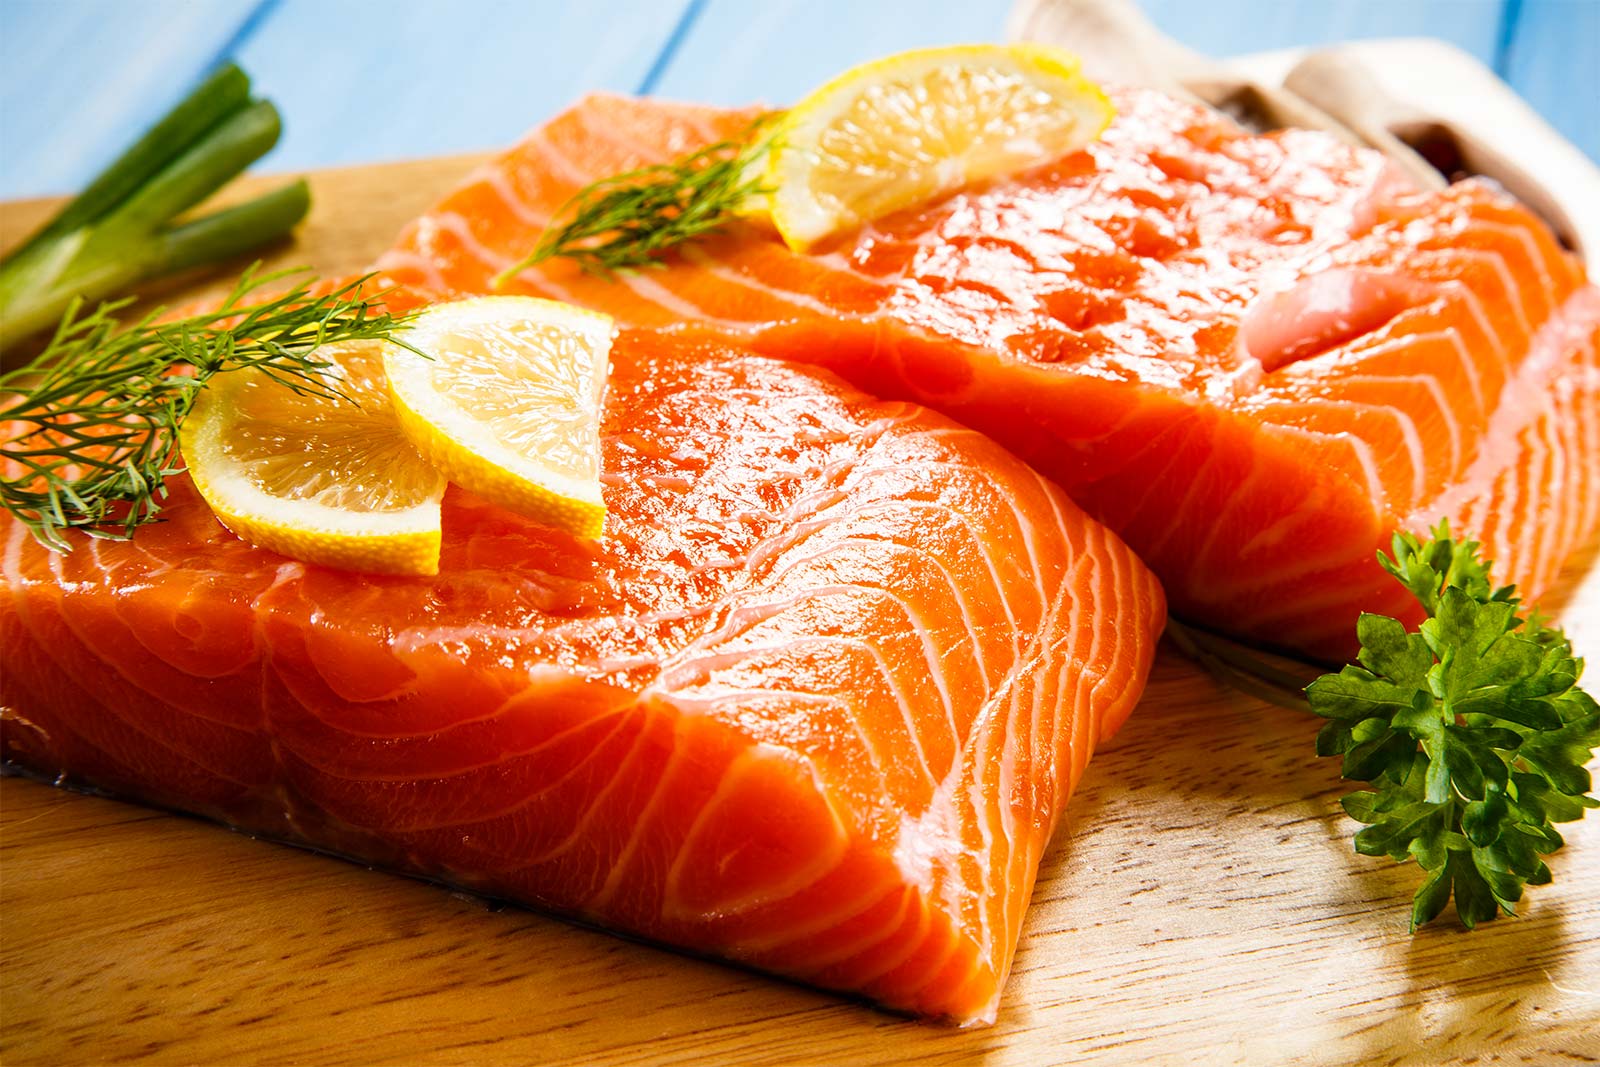 Does Your Real Age Match Your Taste Buds’ Age? Pick a Food for Each of These 16 Ingredients to Find Out Wild salmon